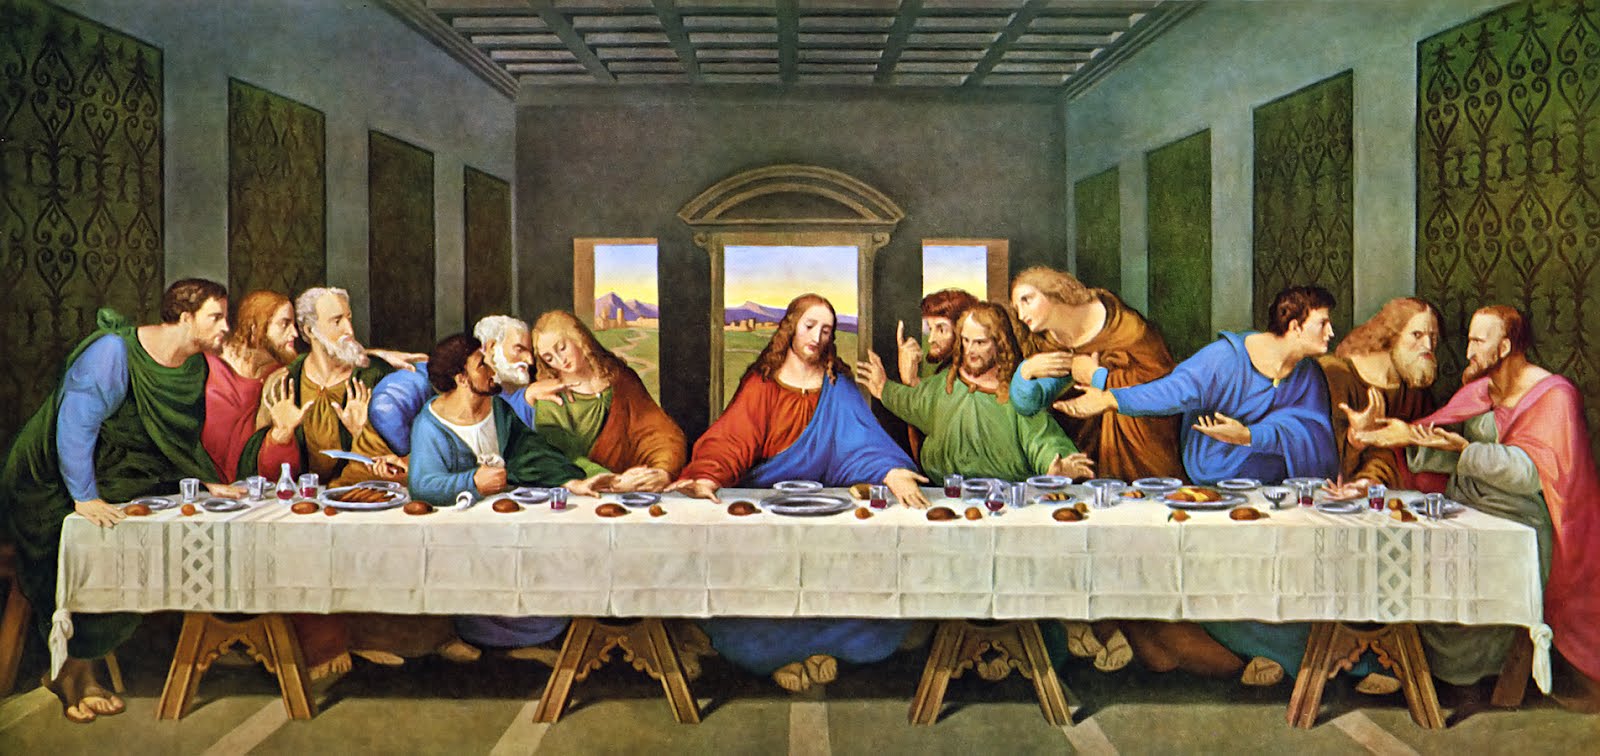 Wallpaper Of The Last Supper Jesus And His Disciples Passion For